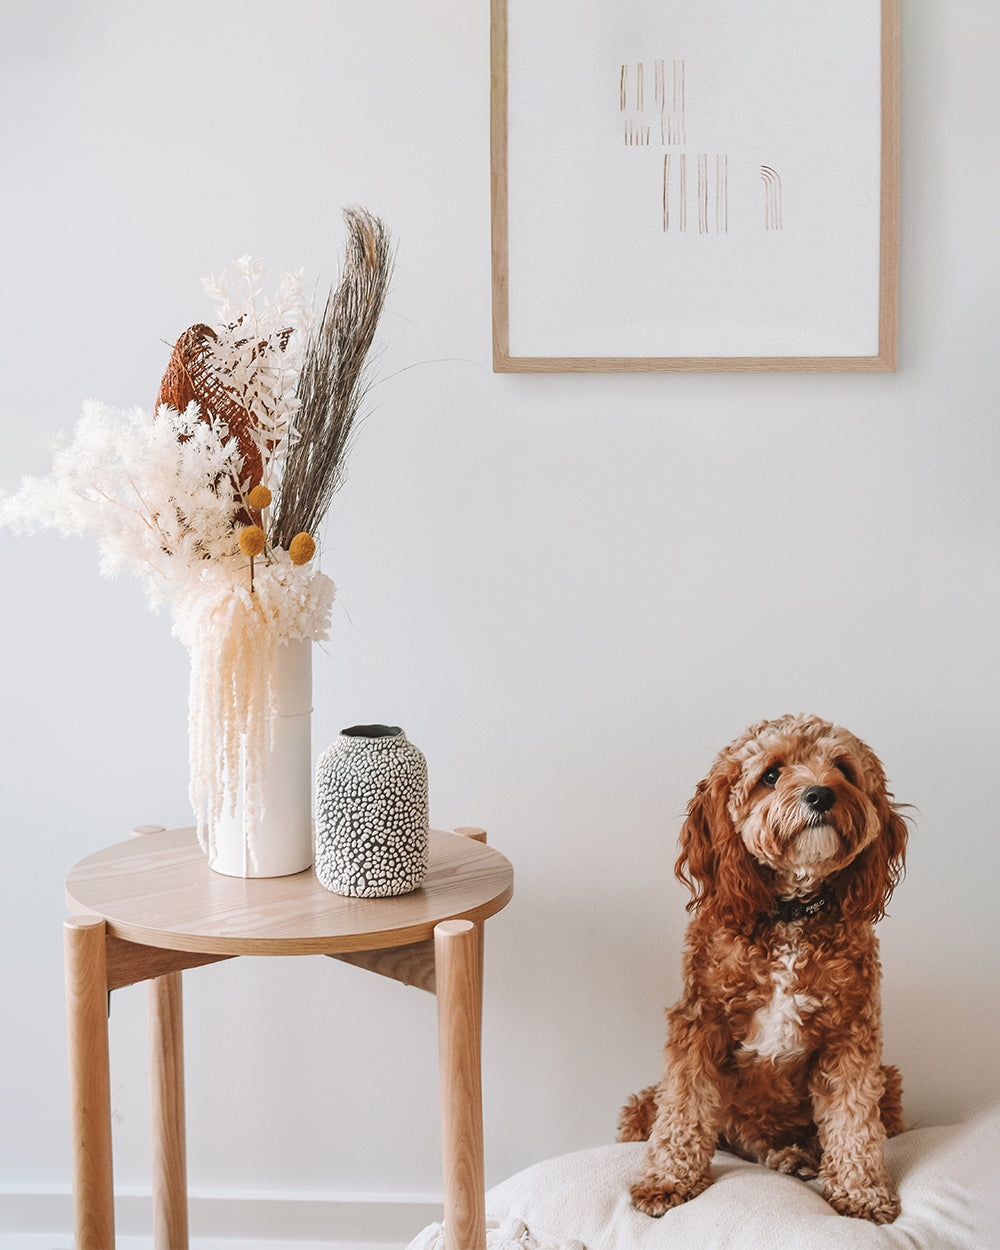 Home decorated with dried flowers and puppy doll